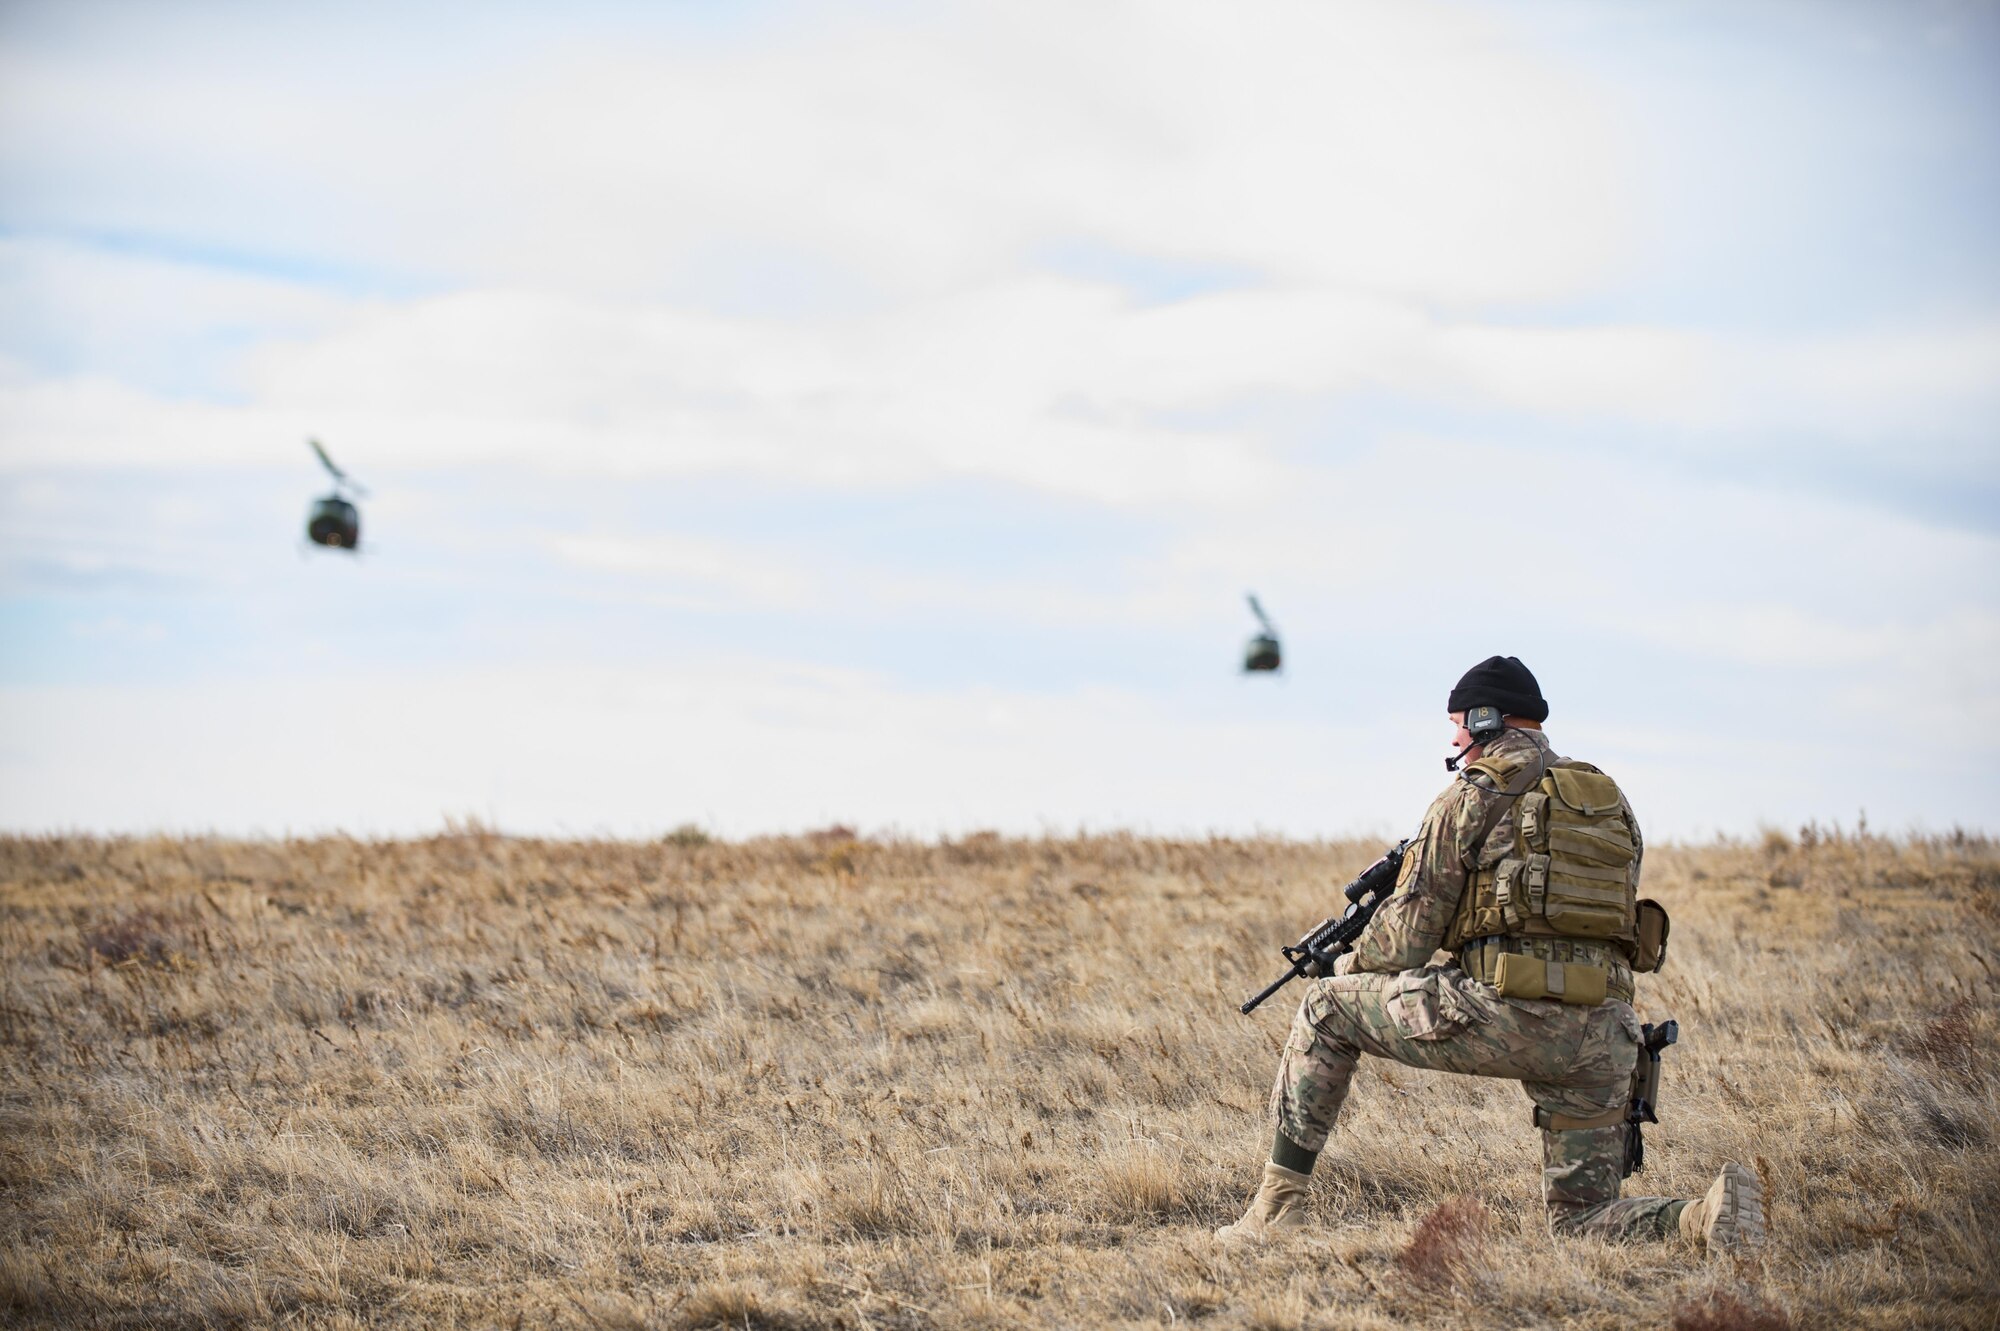 Senior Airman Joshua Hudson, 790th Missile Security Forces Squadron tactical response force assaulter, guards his sector during emergency security response training with the 37th Helicopter Squadron at a launch facility in the F.E. Warren Air Force Base, Wyo., missile complex, Dec. 16, 2016. The 790th MSFS continually conducts training operations and exercises to ensure forces are ready to perform response operations. (U.S. Air Force photo by Staff Sgt. Christopher Ruano)